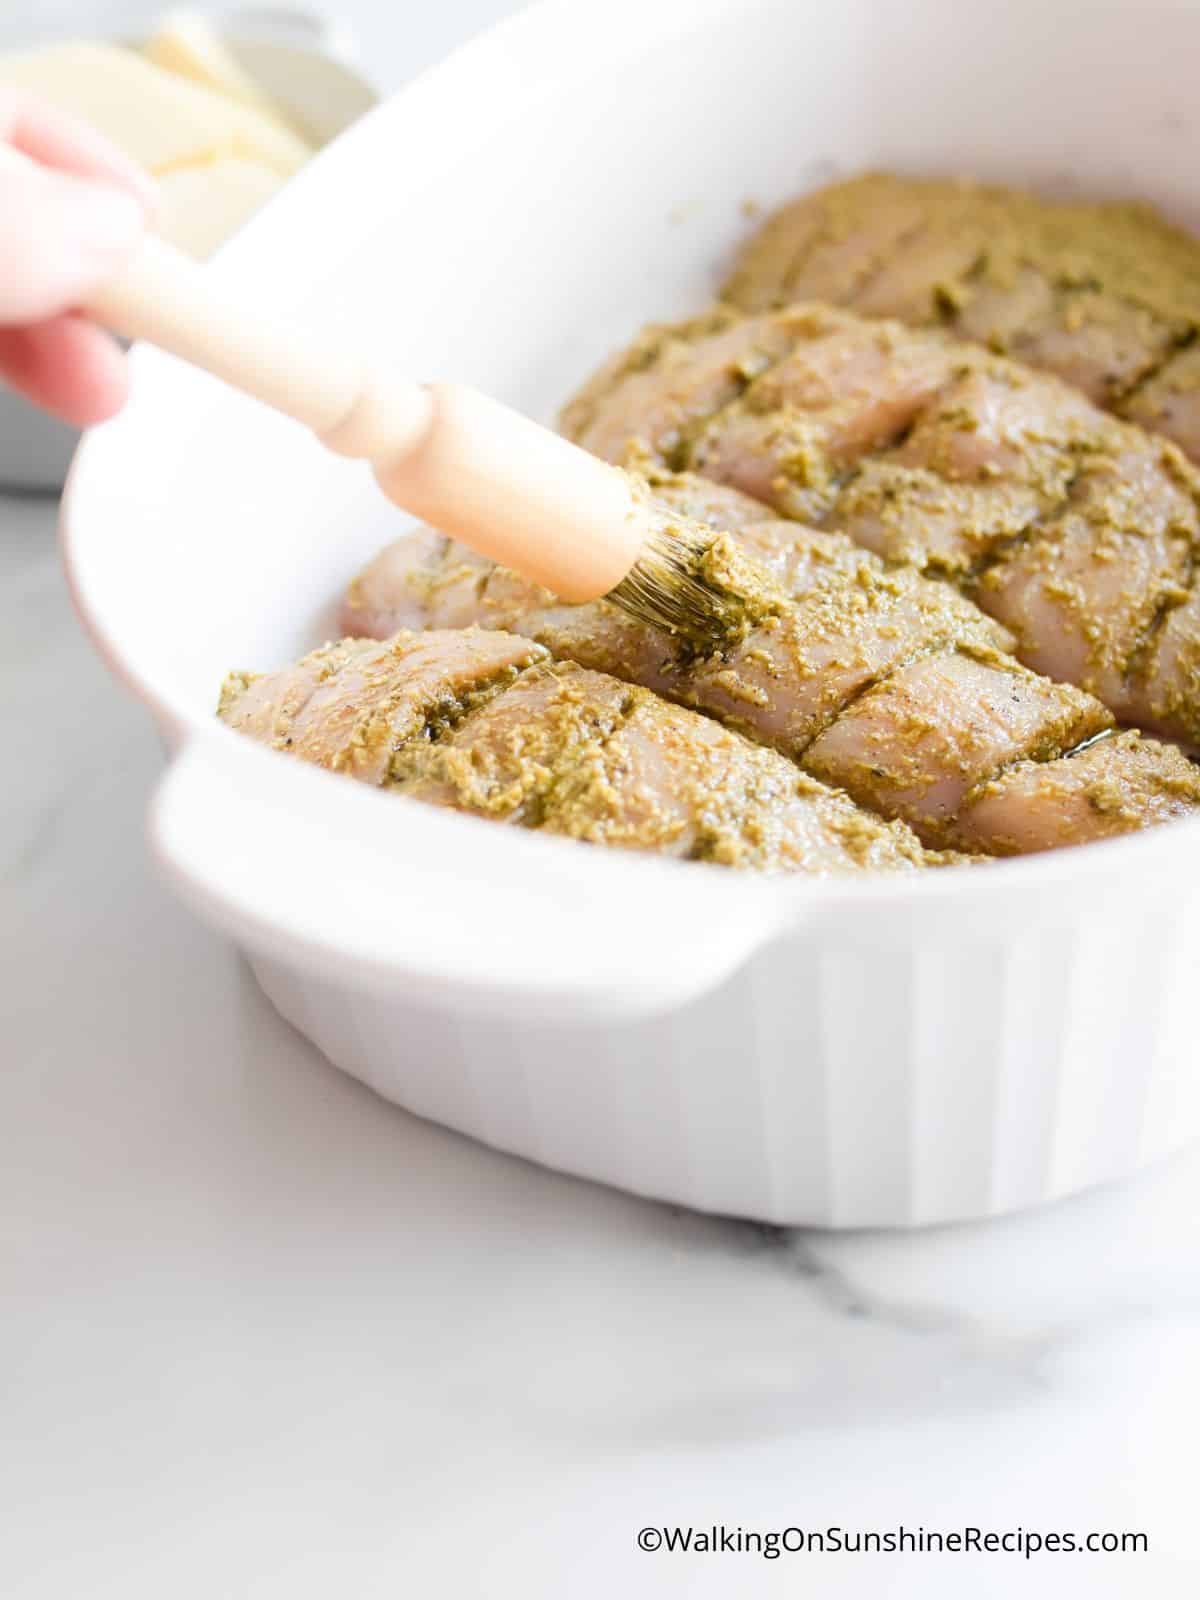 how to add pesto sauce to chicken.